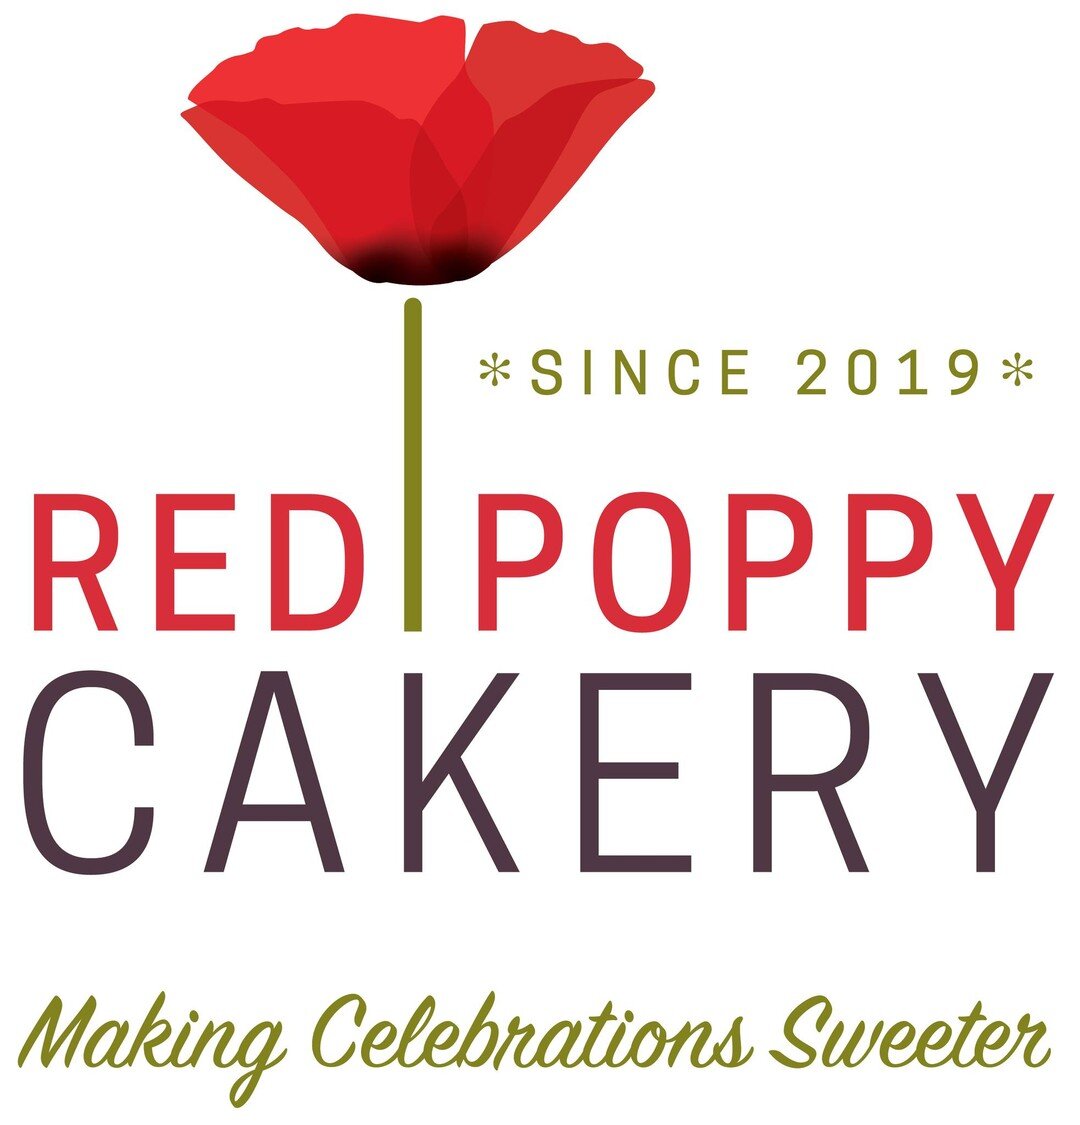 Happy World Baking Day! Now get yourself over to @redpoppycakeryvt and order yourself some cake&mdash;and maybe admire their awesome logo too. We think both are pretty sweet. 

#worldbakingday #eatcake #cupcakes #waterburyvt #bakerylogo #logodesign #